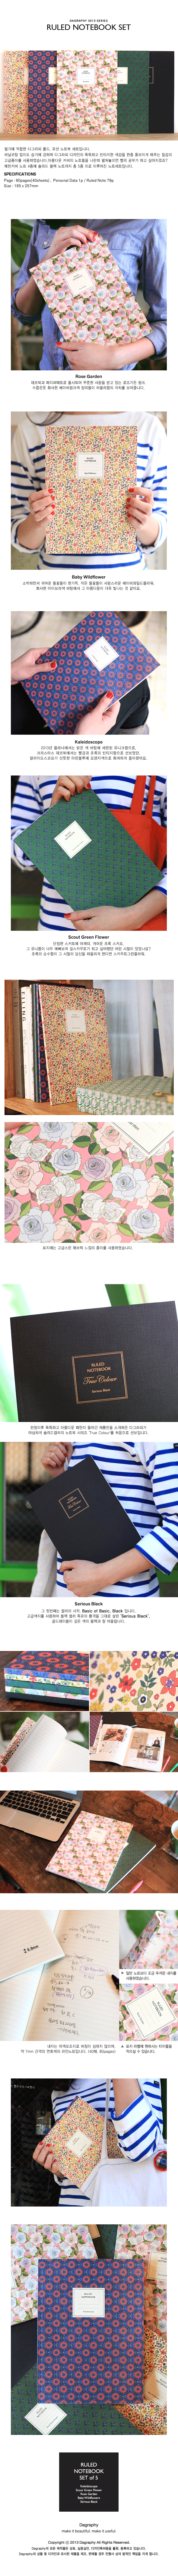 dagraphy luxury floral lined notebooks [luxury notebooks, lined notebooks, lined notebook]